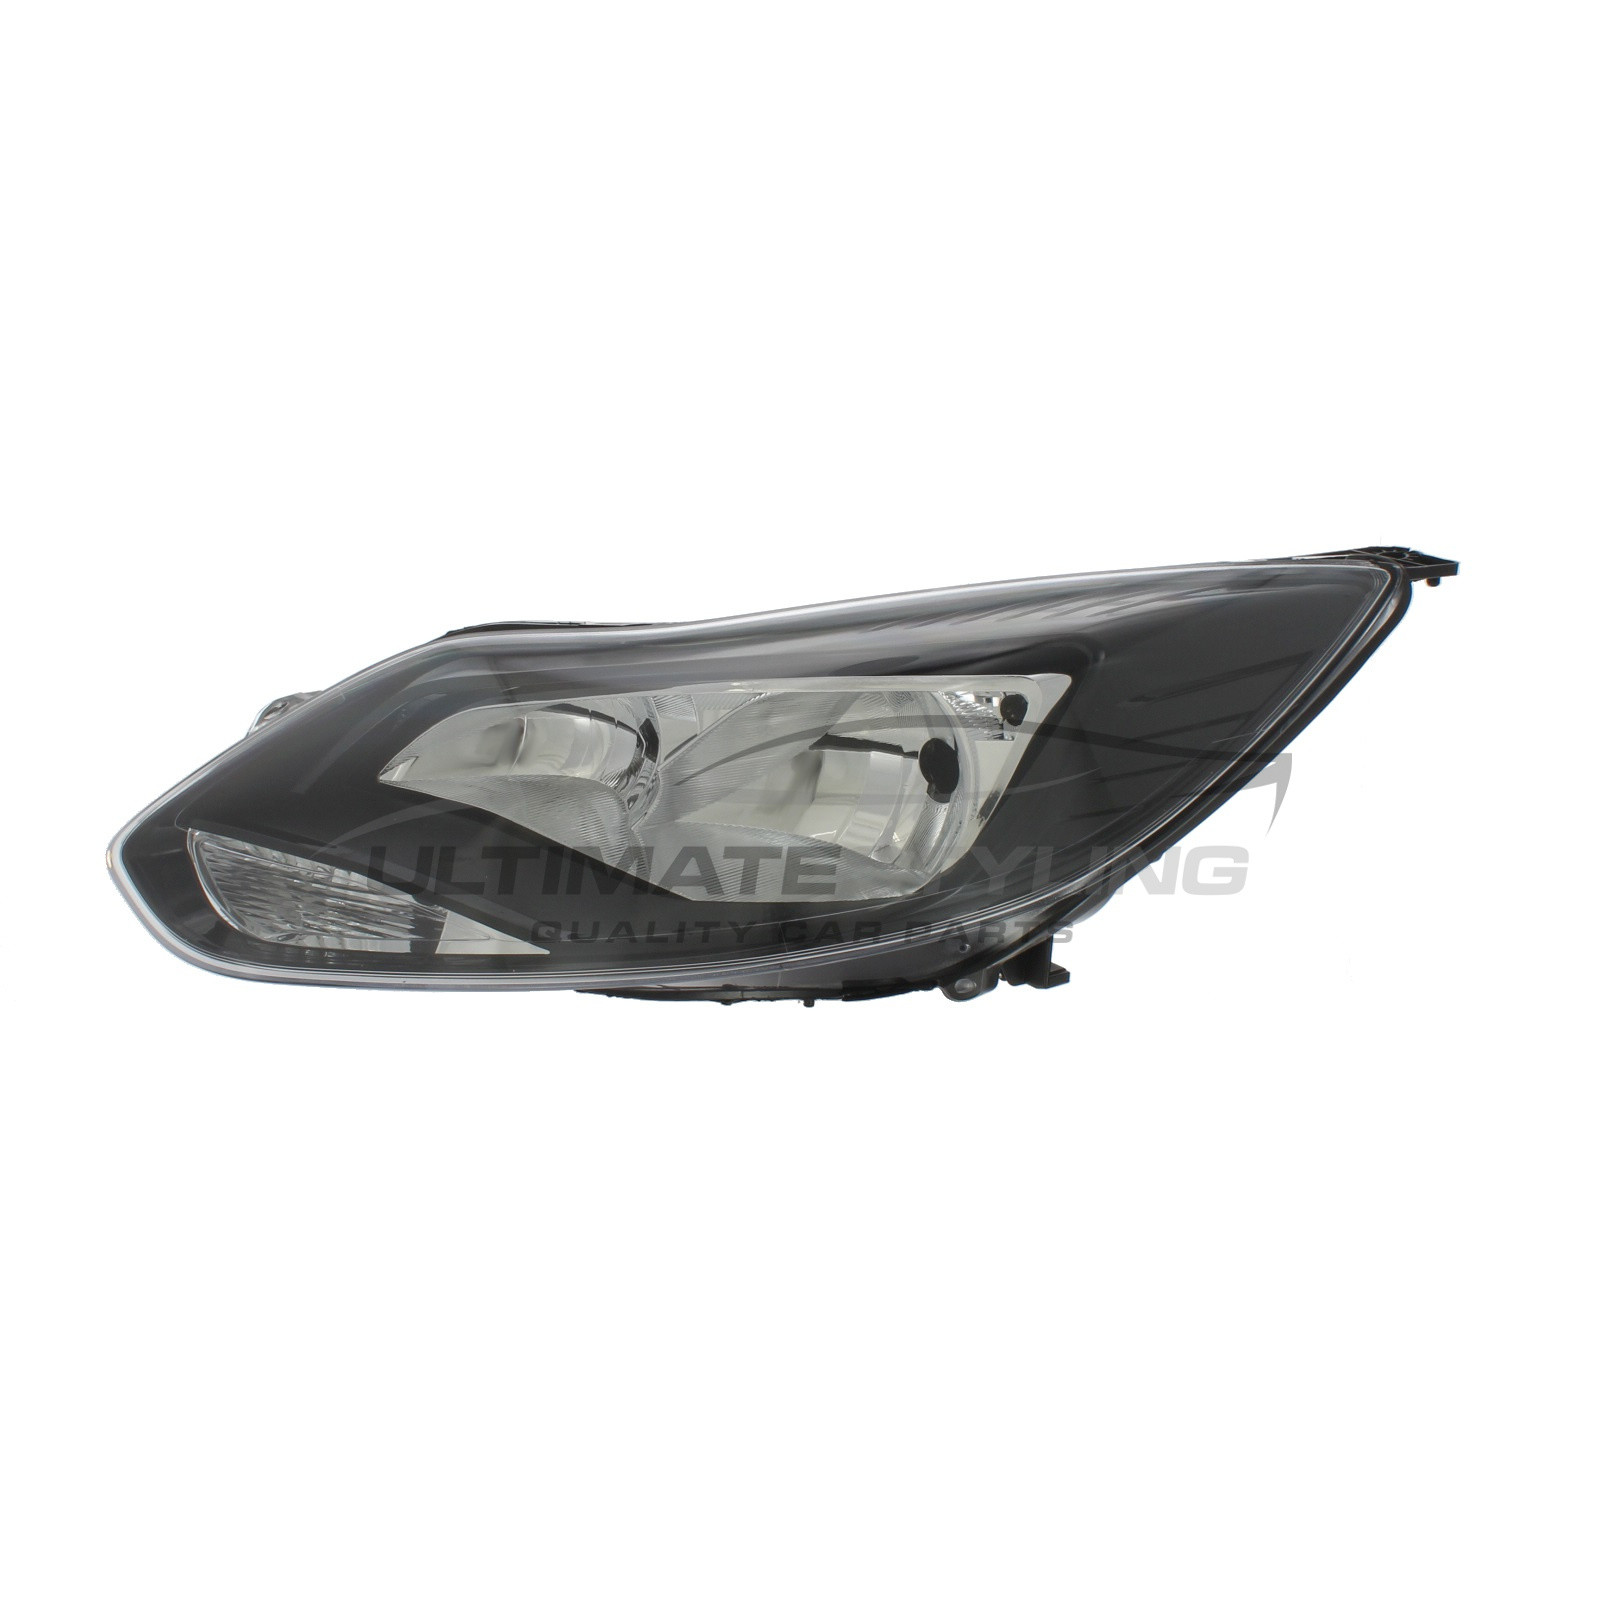 Ford Focus 2008-2013 Halogen, Electric With Motor, Headlight / Headlamp with Black Surround Passengers Side (LH)